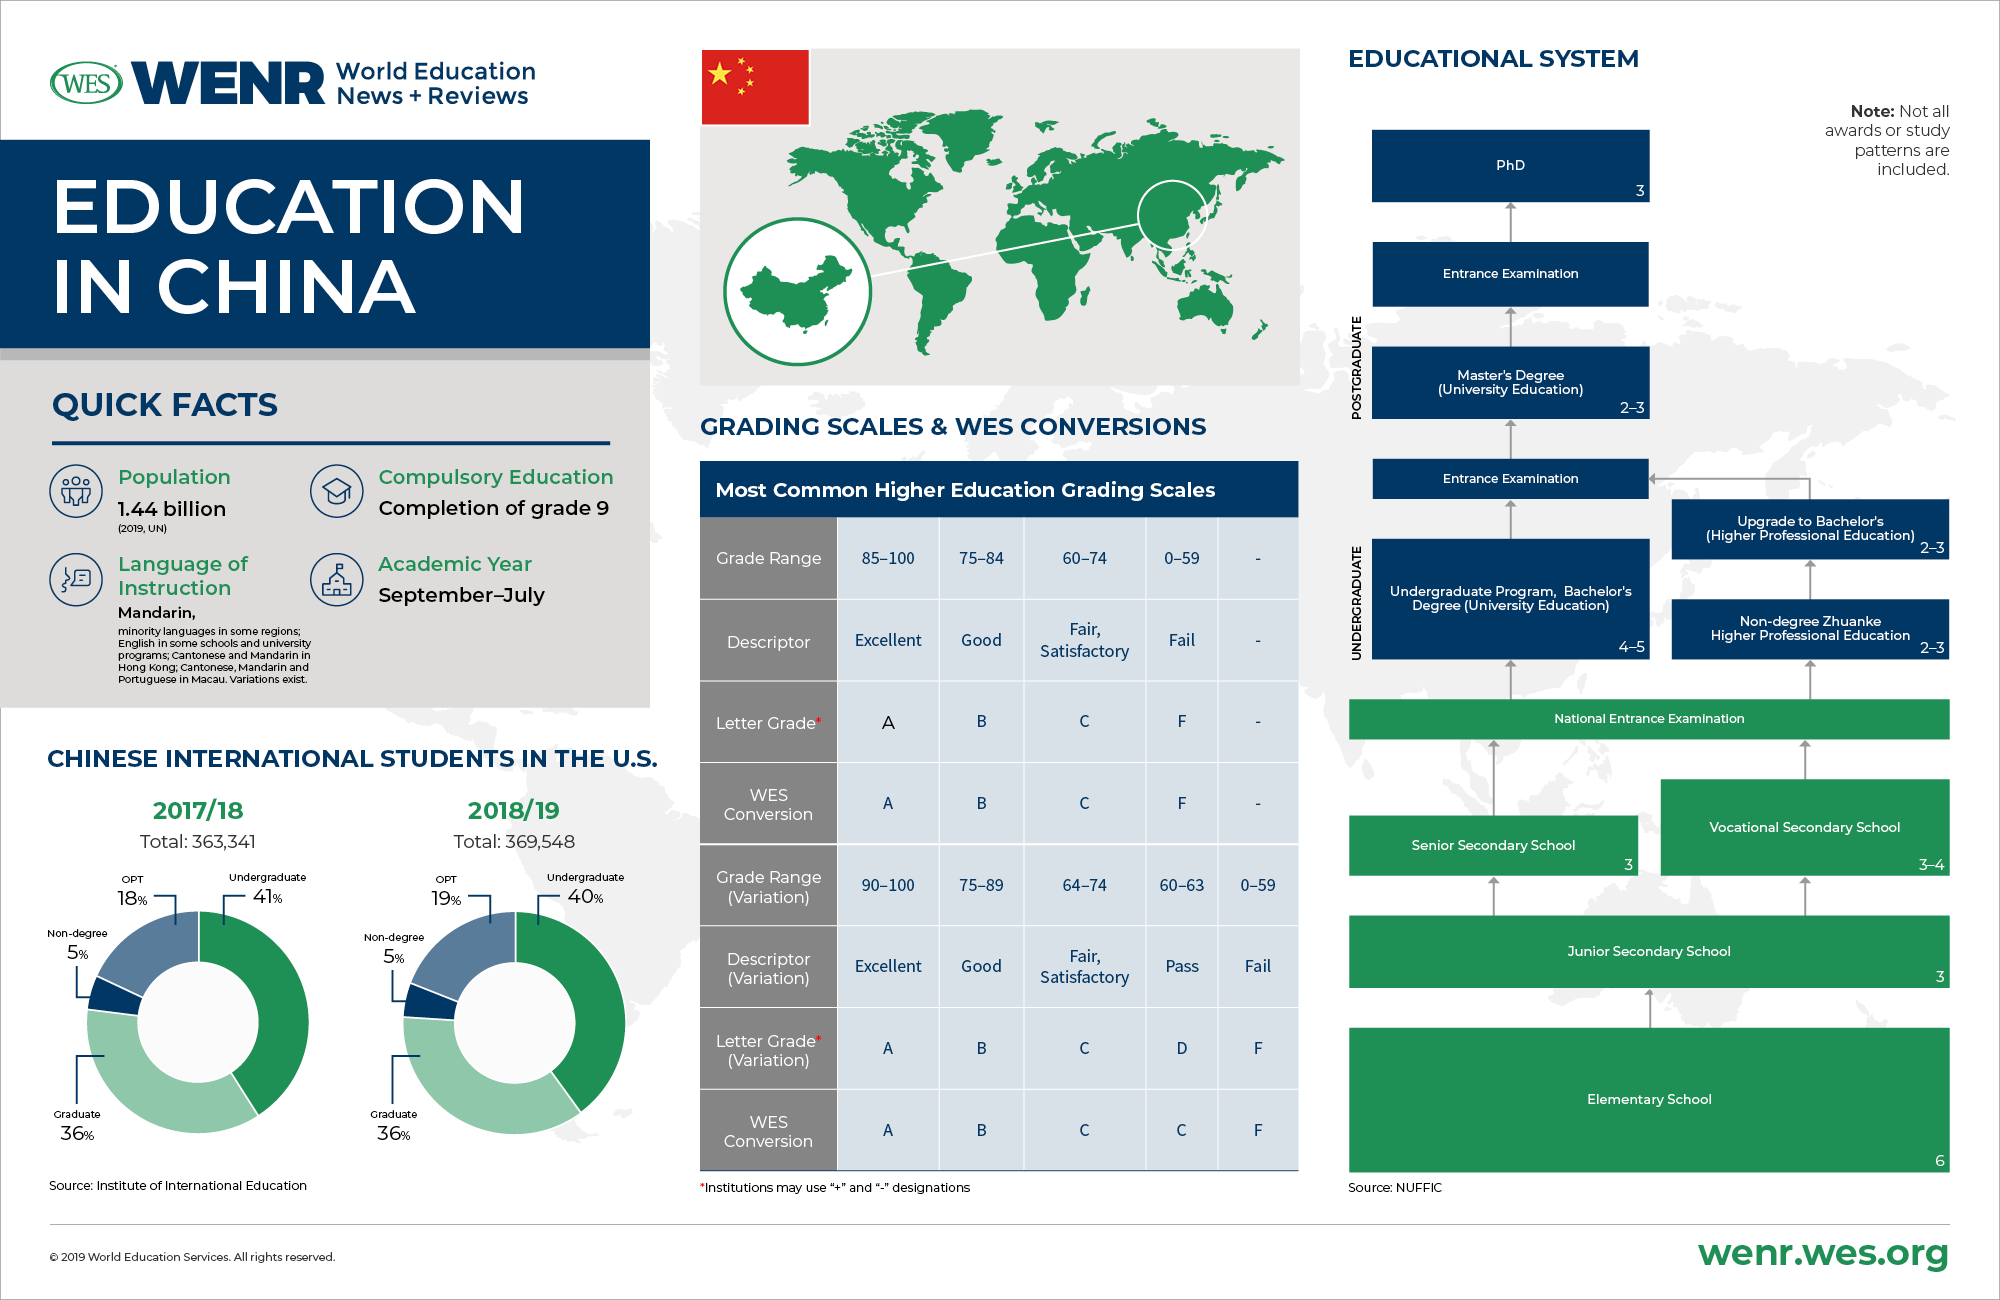 Education in China infographic: quick facts about education in China